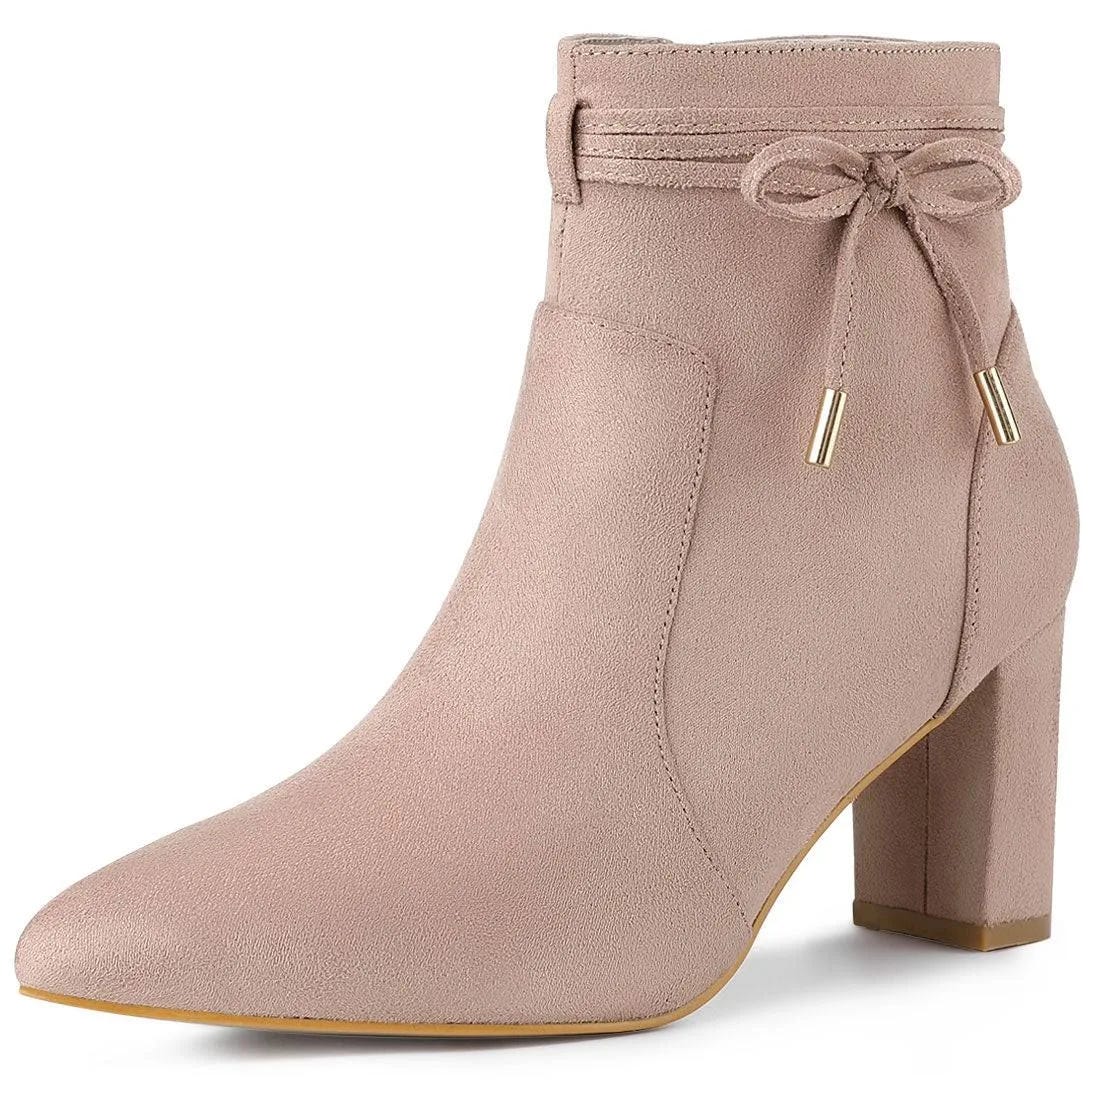 Chic Pointed Toe Ankle Boot with Bow Decor | Image